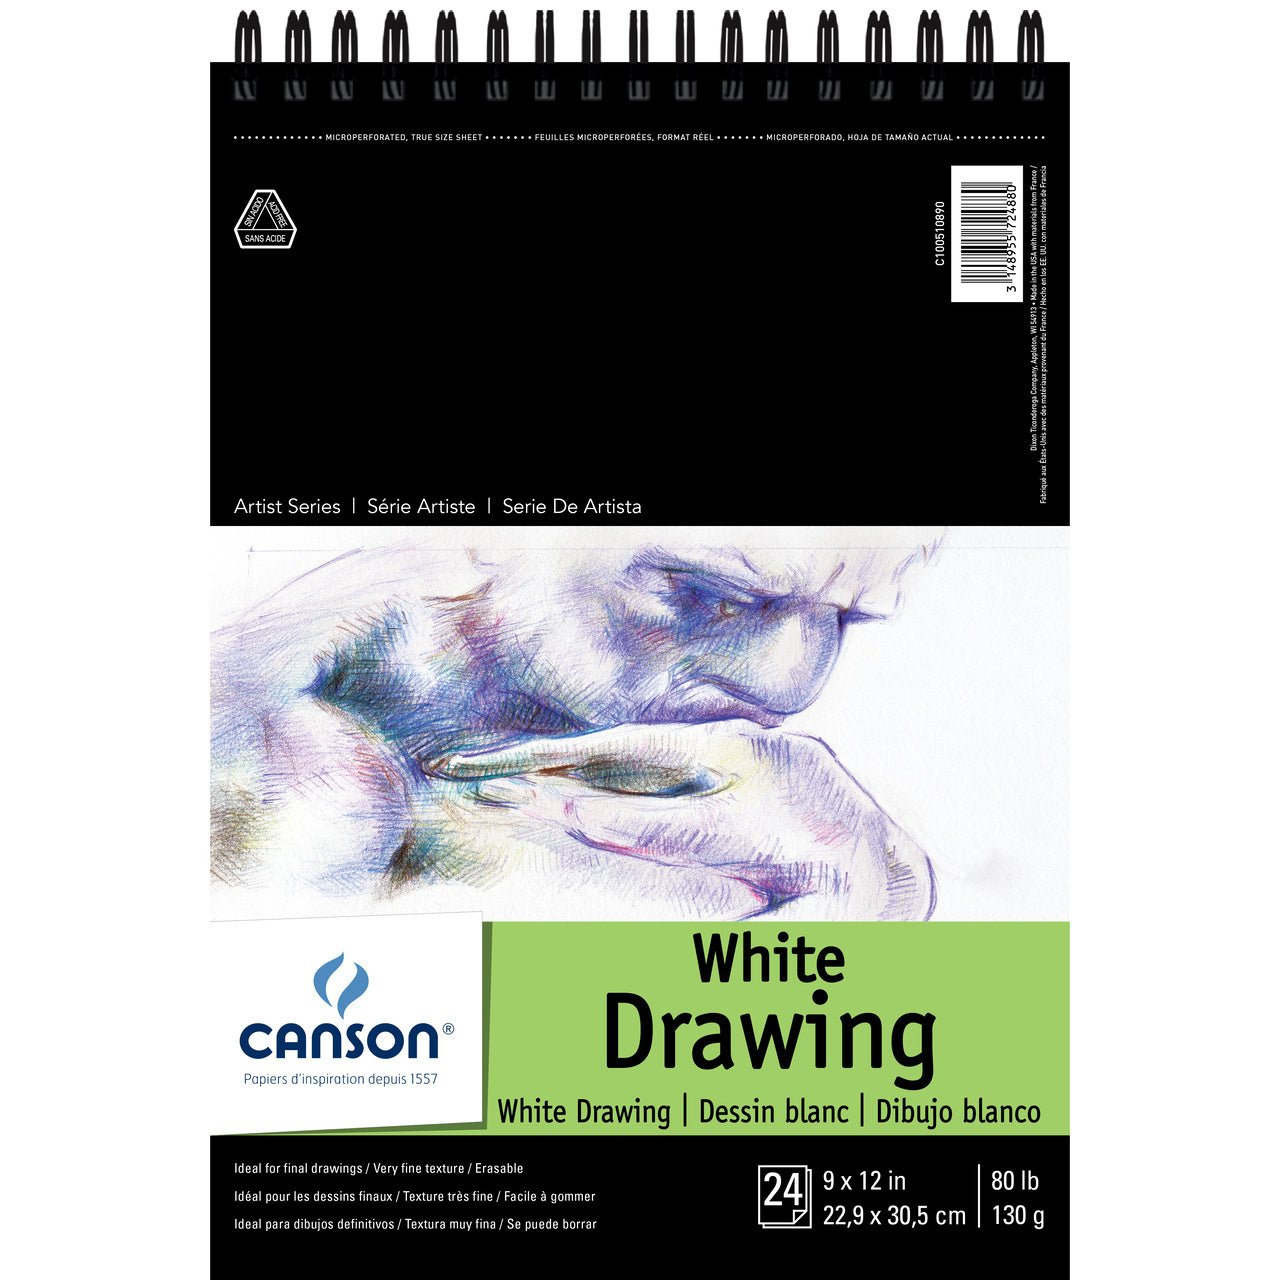 Canson Pure White 80 lb Drawing Pad 9x12 inch - merriartist.com